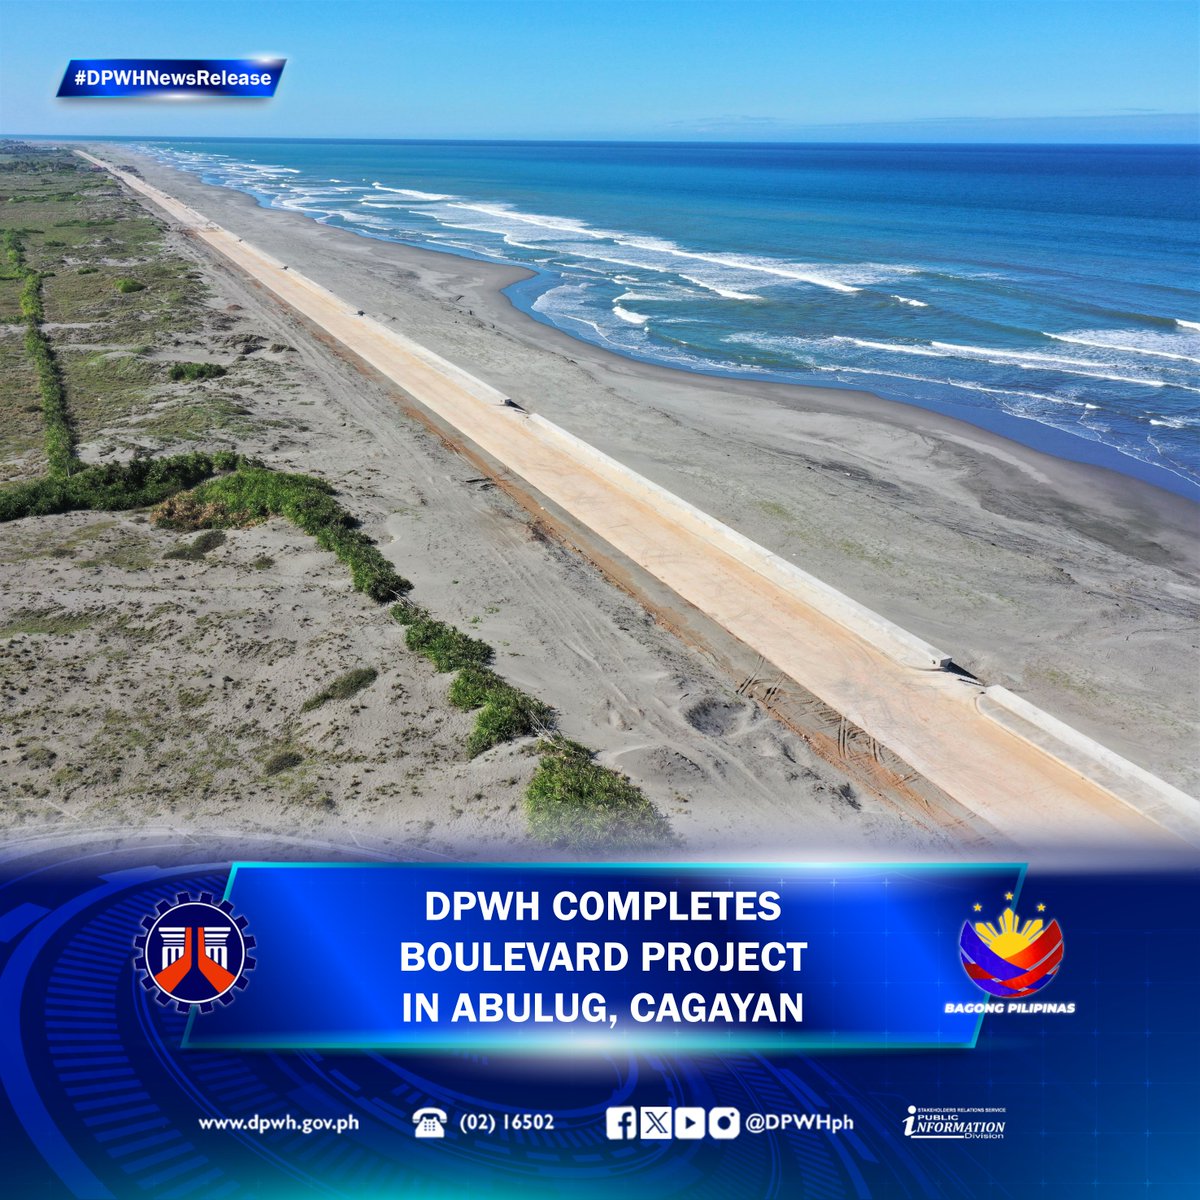 DPWH Completes Boulevard Project in Abulug, Cagayan | Full Story: dpwh.gov.ph/dpwh/news/33447 #DPWH #BuildBetterMore #BagongPilipinas